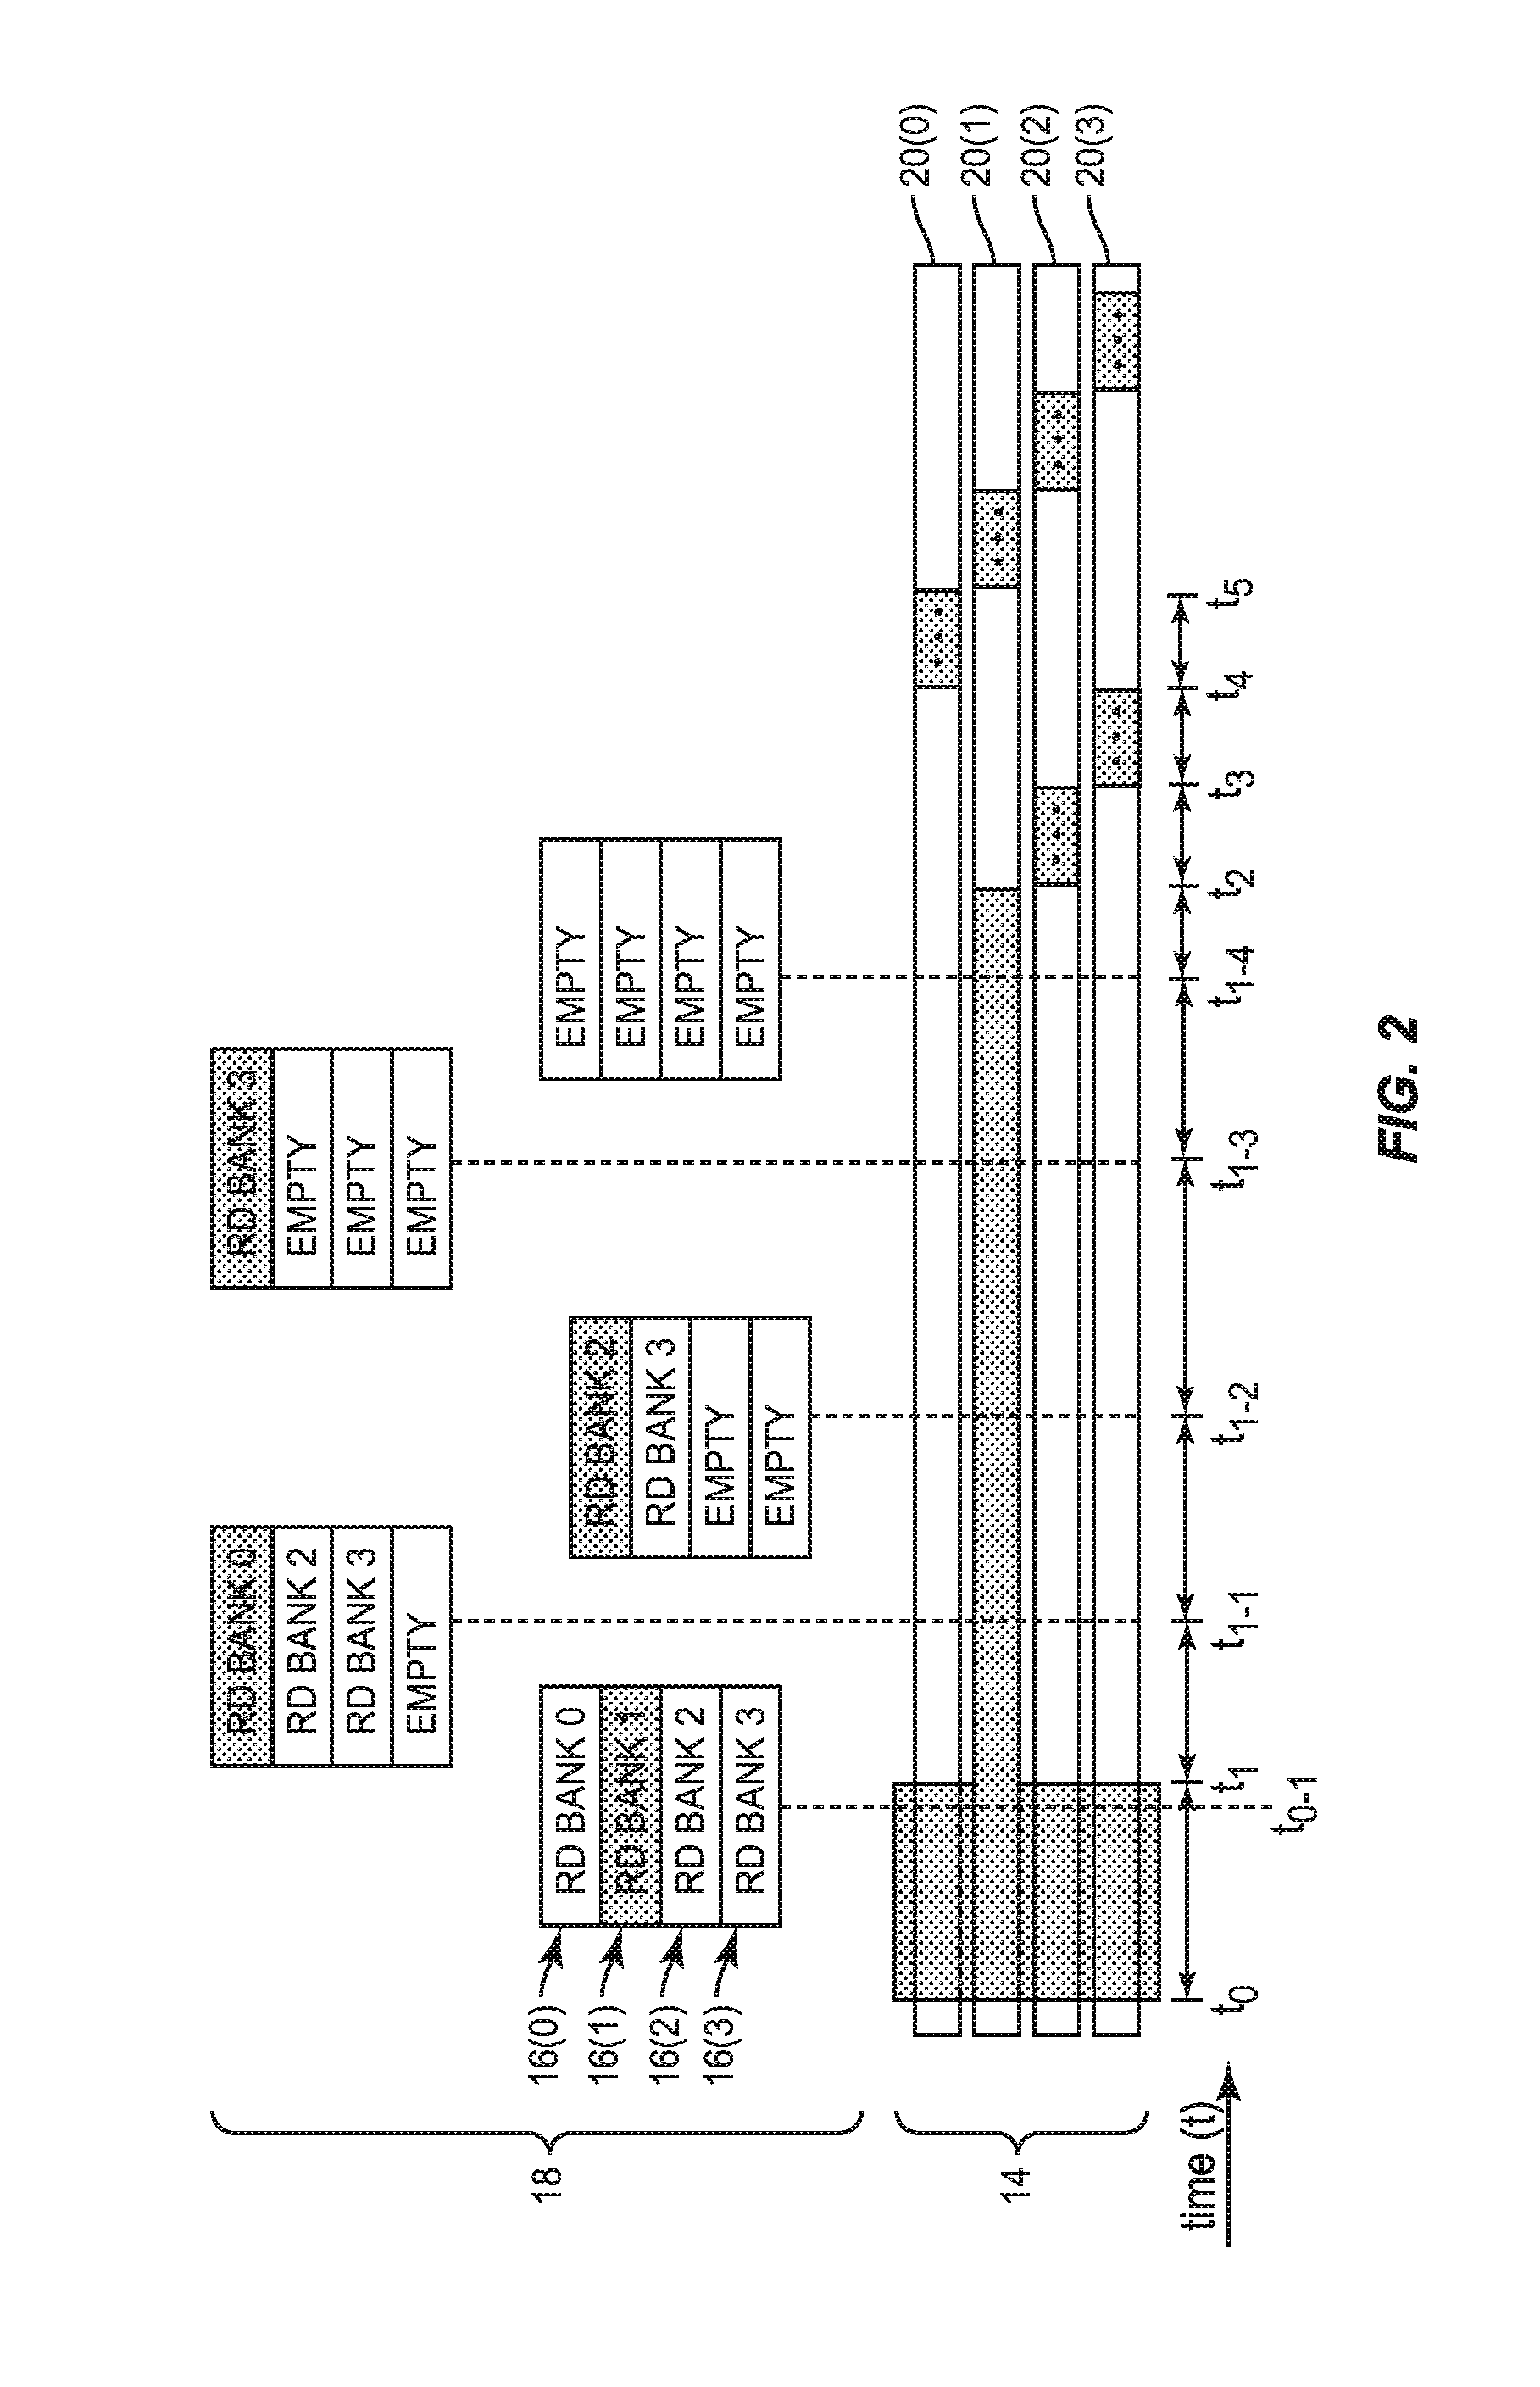 Priority adjustment of dynamic random access memory (DRAM) transactions prior to issuing a per-bank refresh for reducing dram unavailability